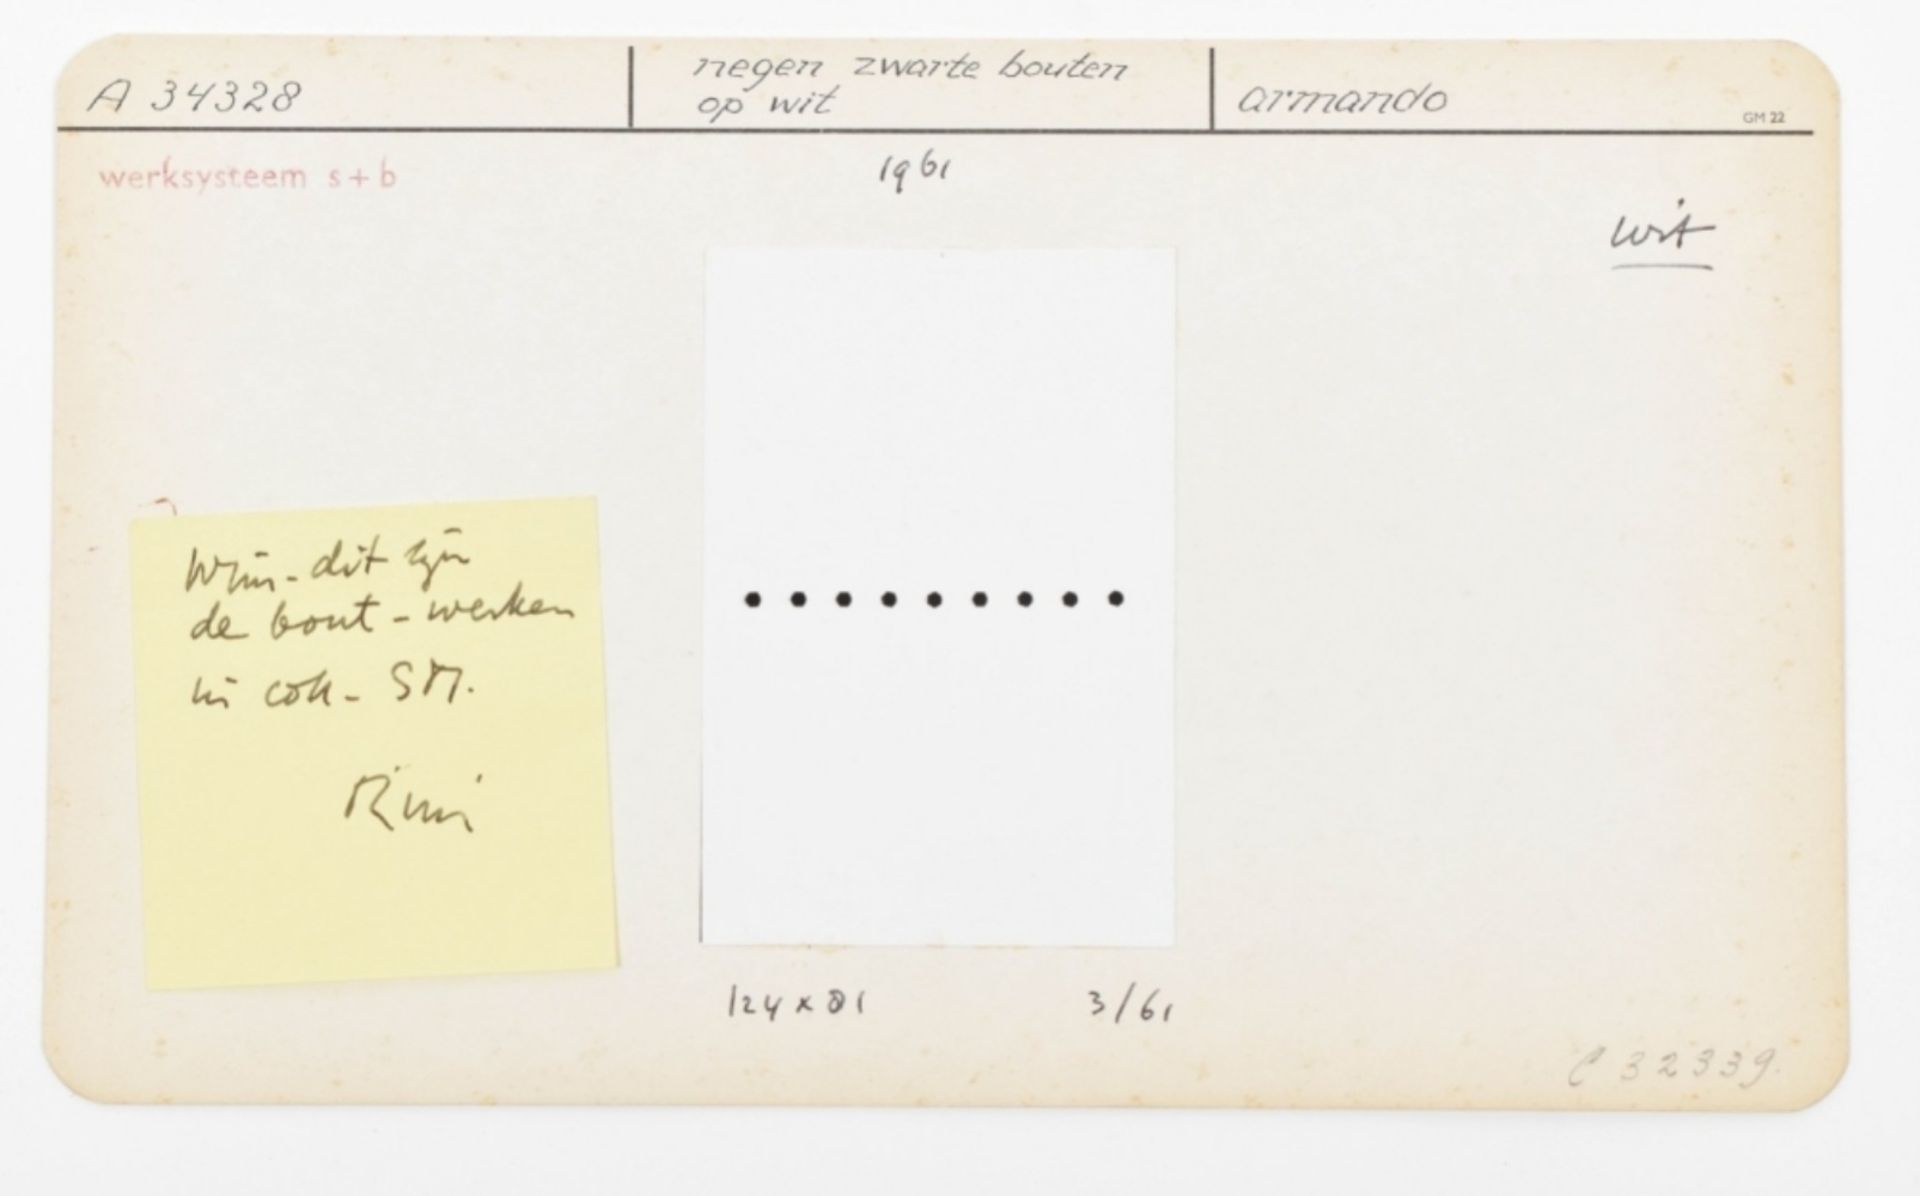 Armando, filing cards from the Stedelijk Museum, 1961-1971 - Image 5 of 6